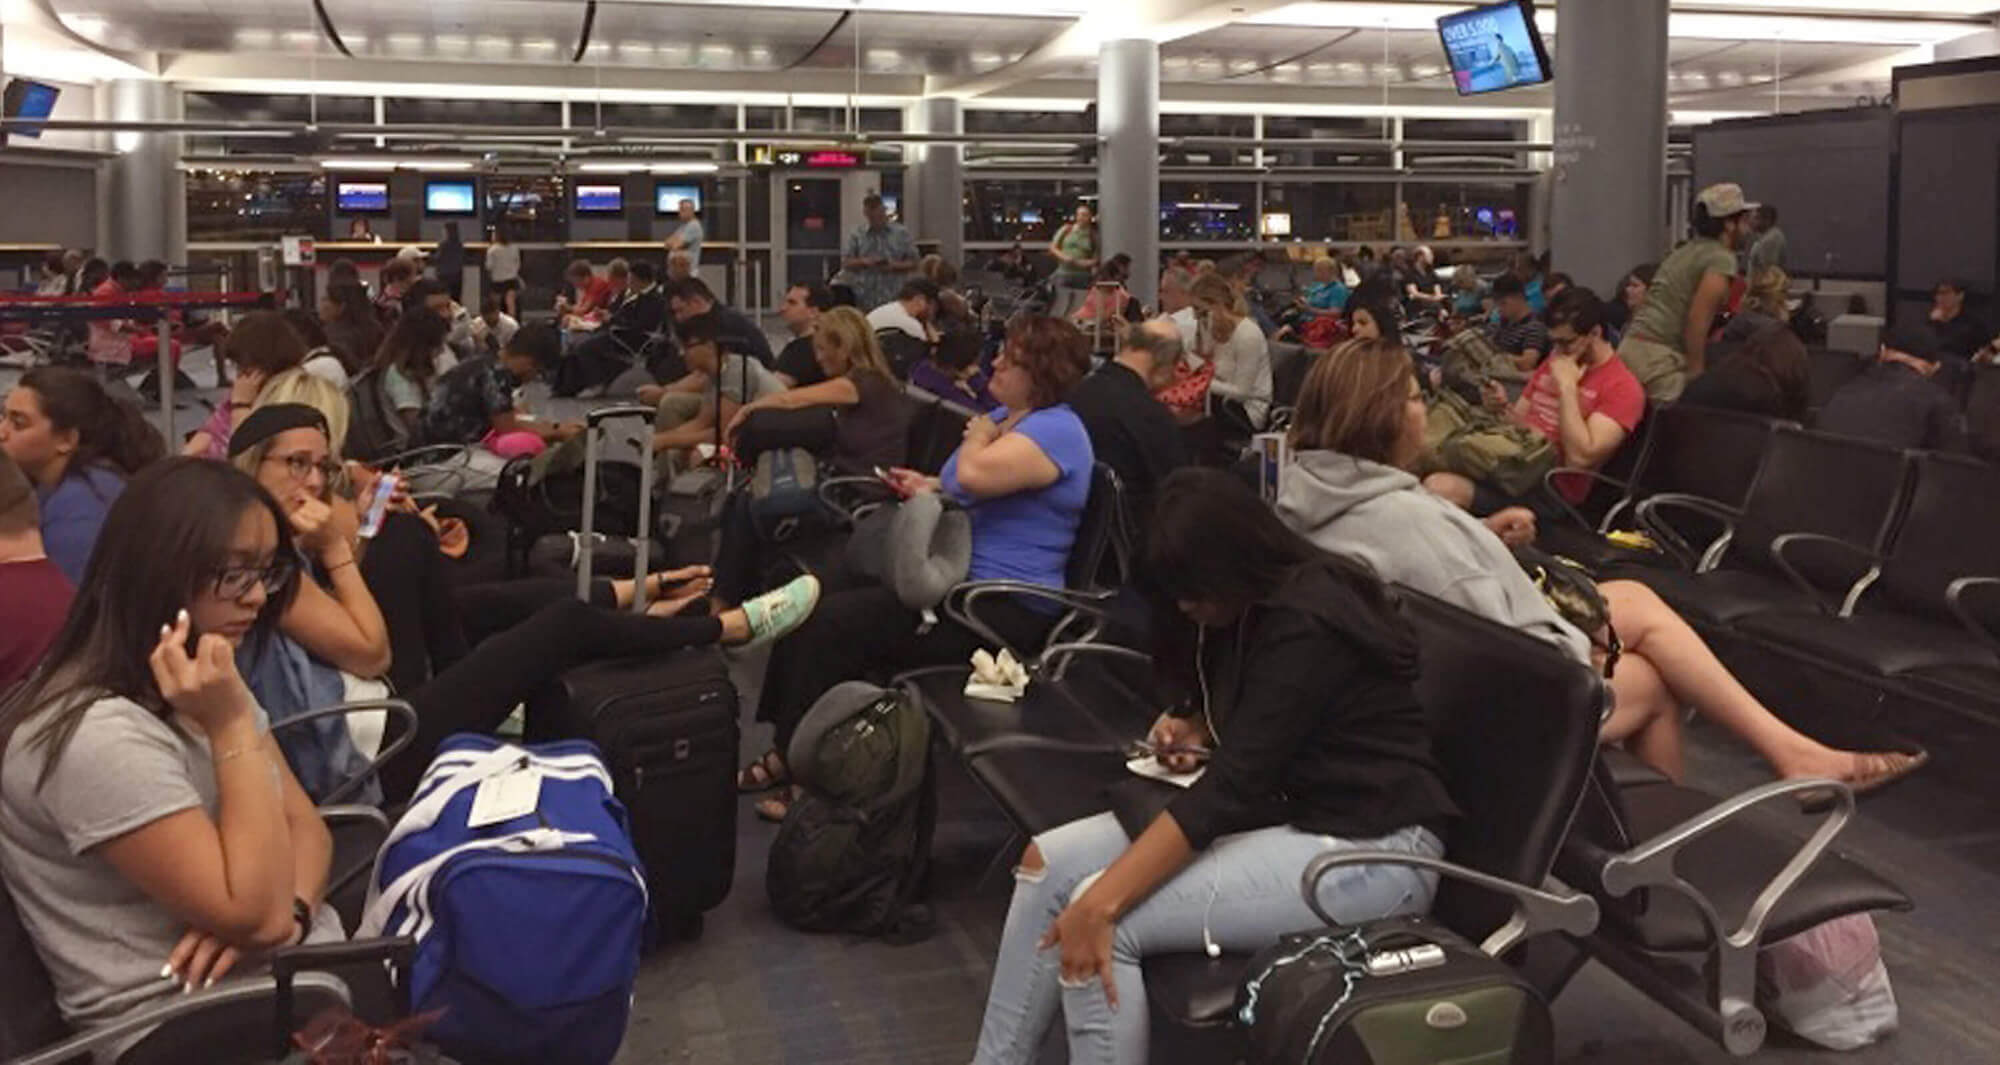 Image of passengers in the Delta Airlines boarding area at McCarran International Airport